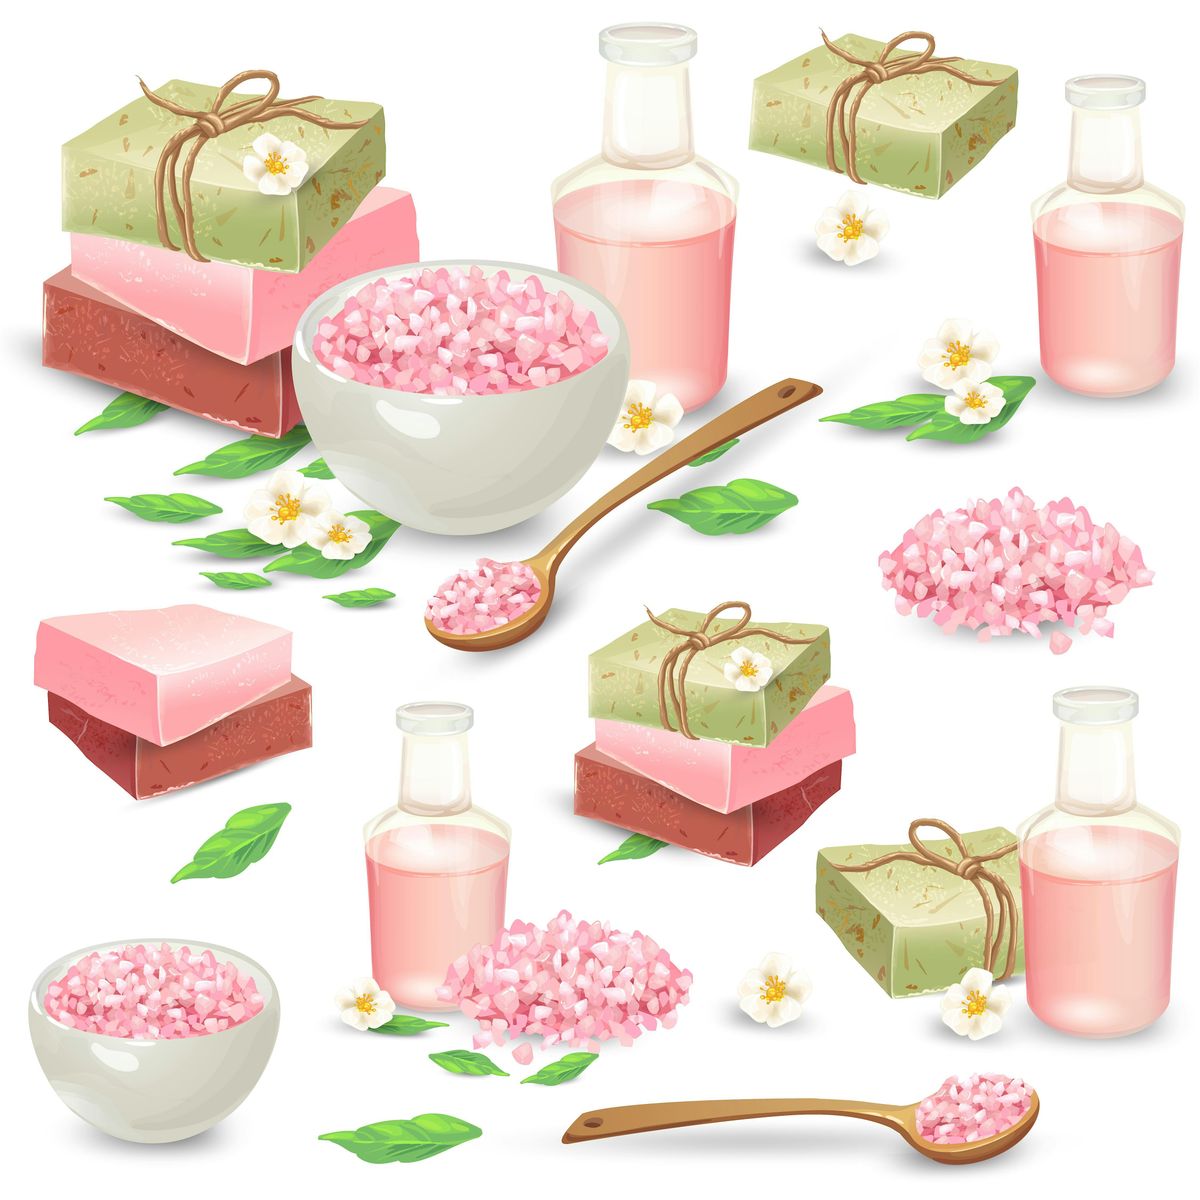 Soapmaking & Design Experience